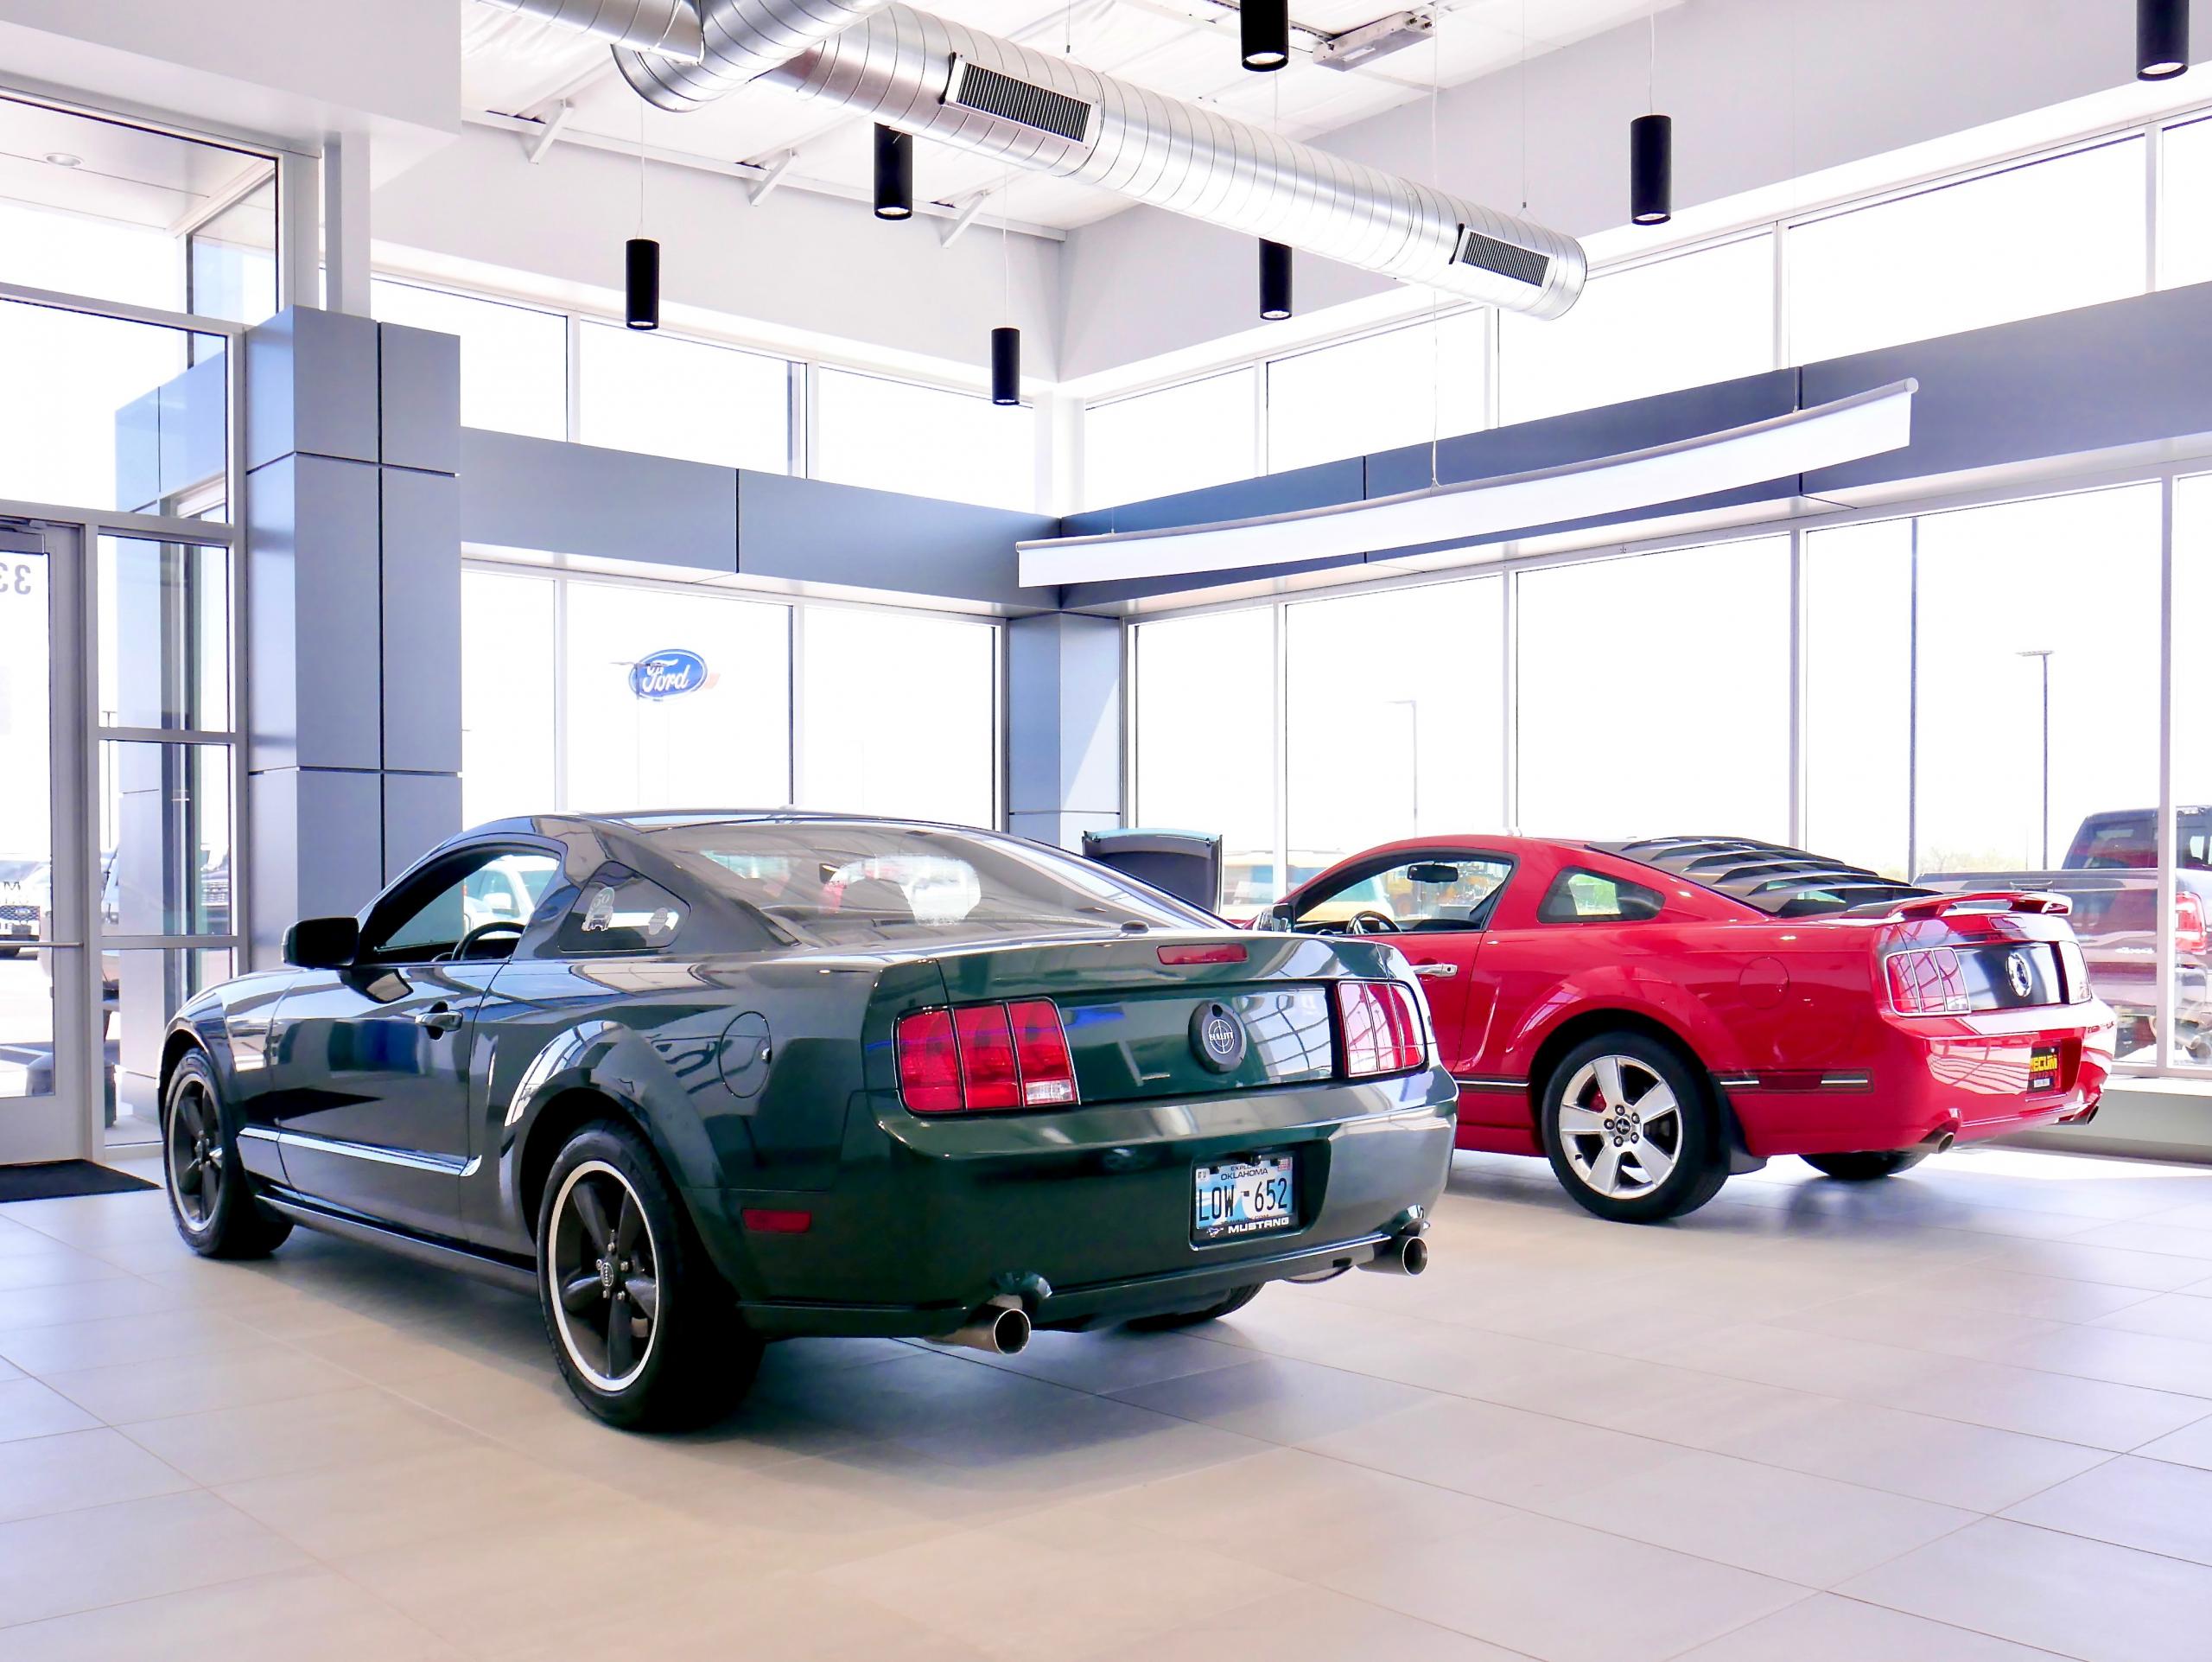 Find Affordable New Or Pre-Owned Ford Cars, Trucks, And SUVs In Wellston, OK